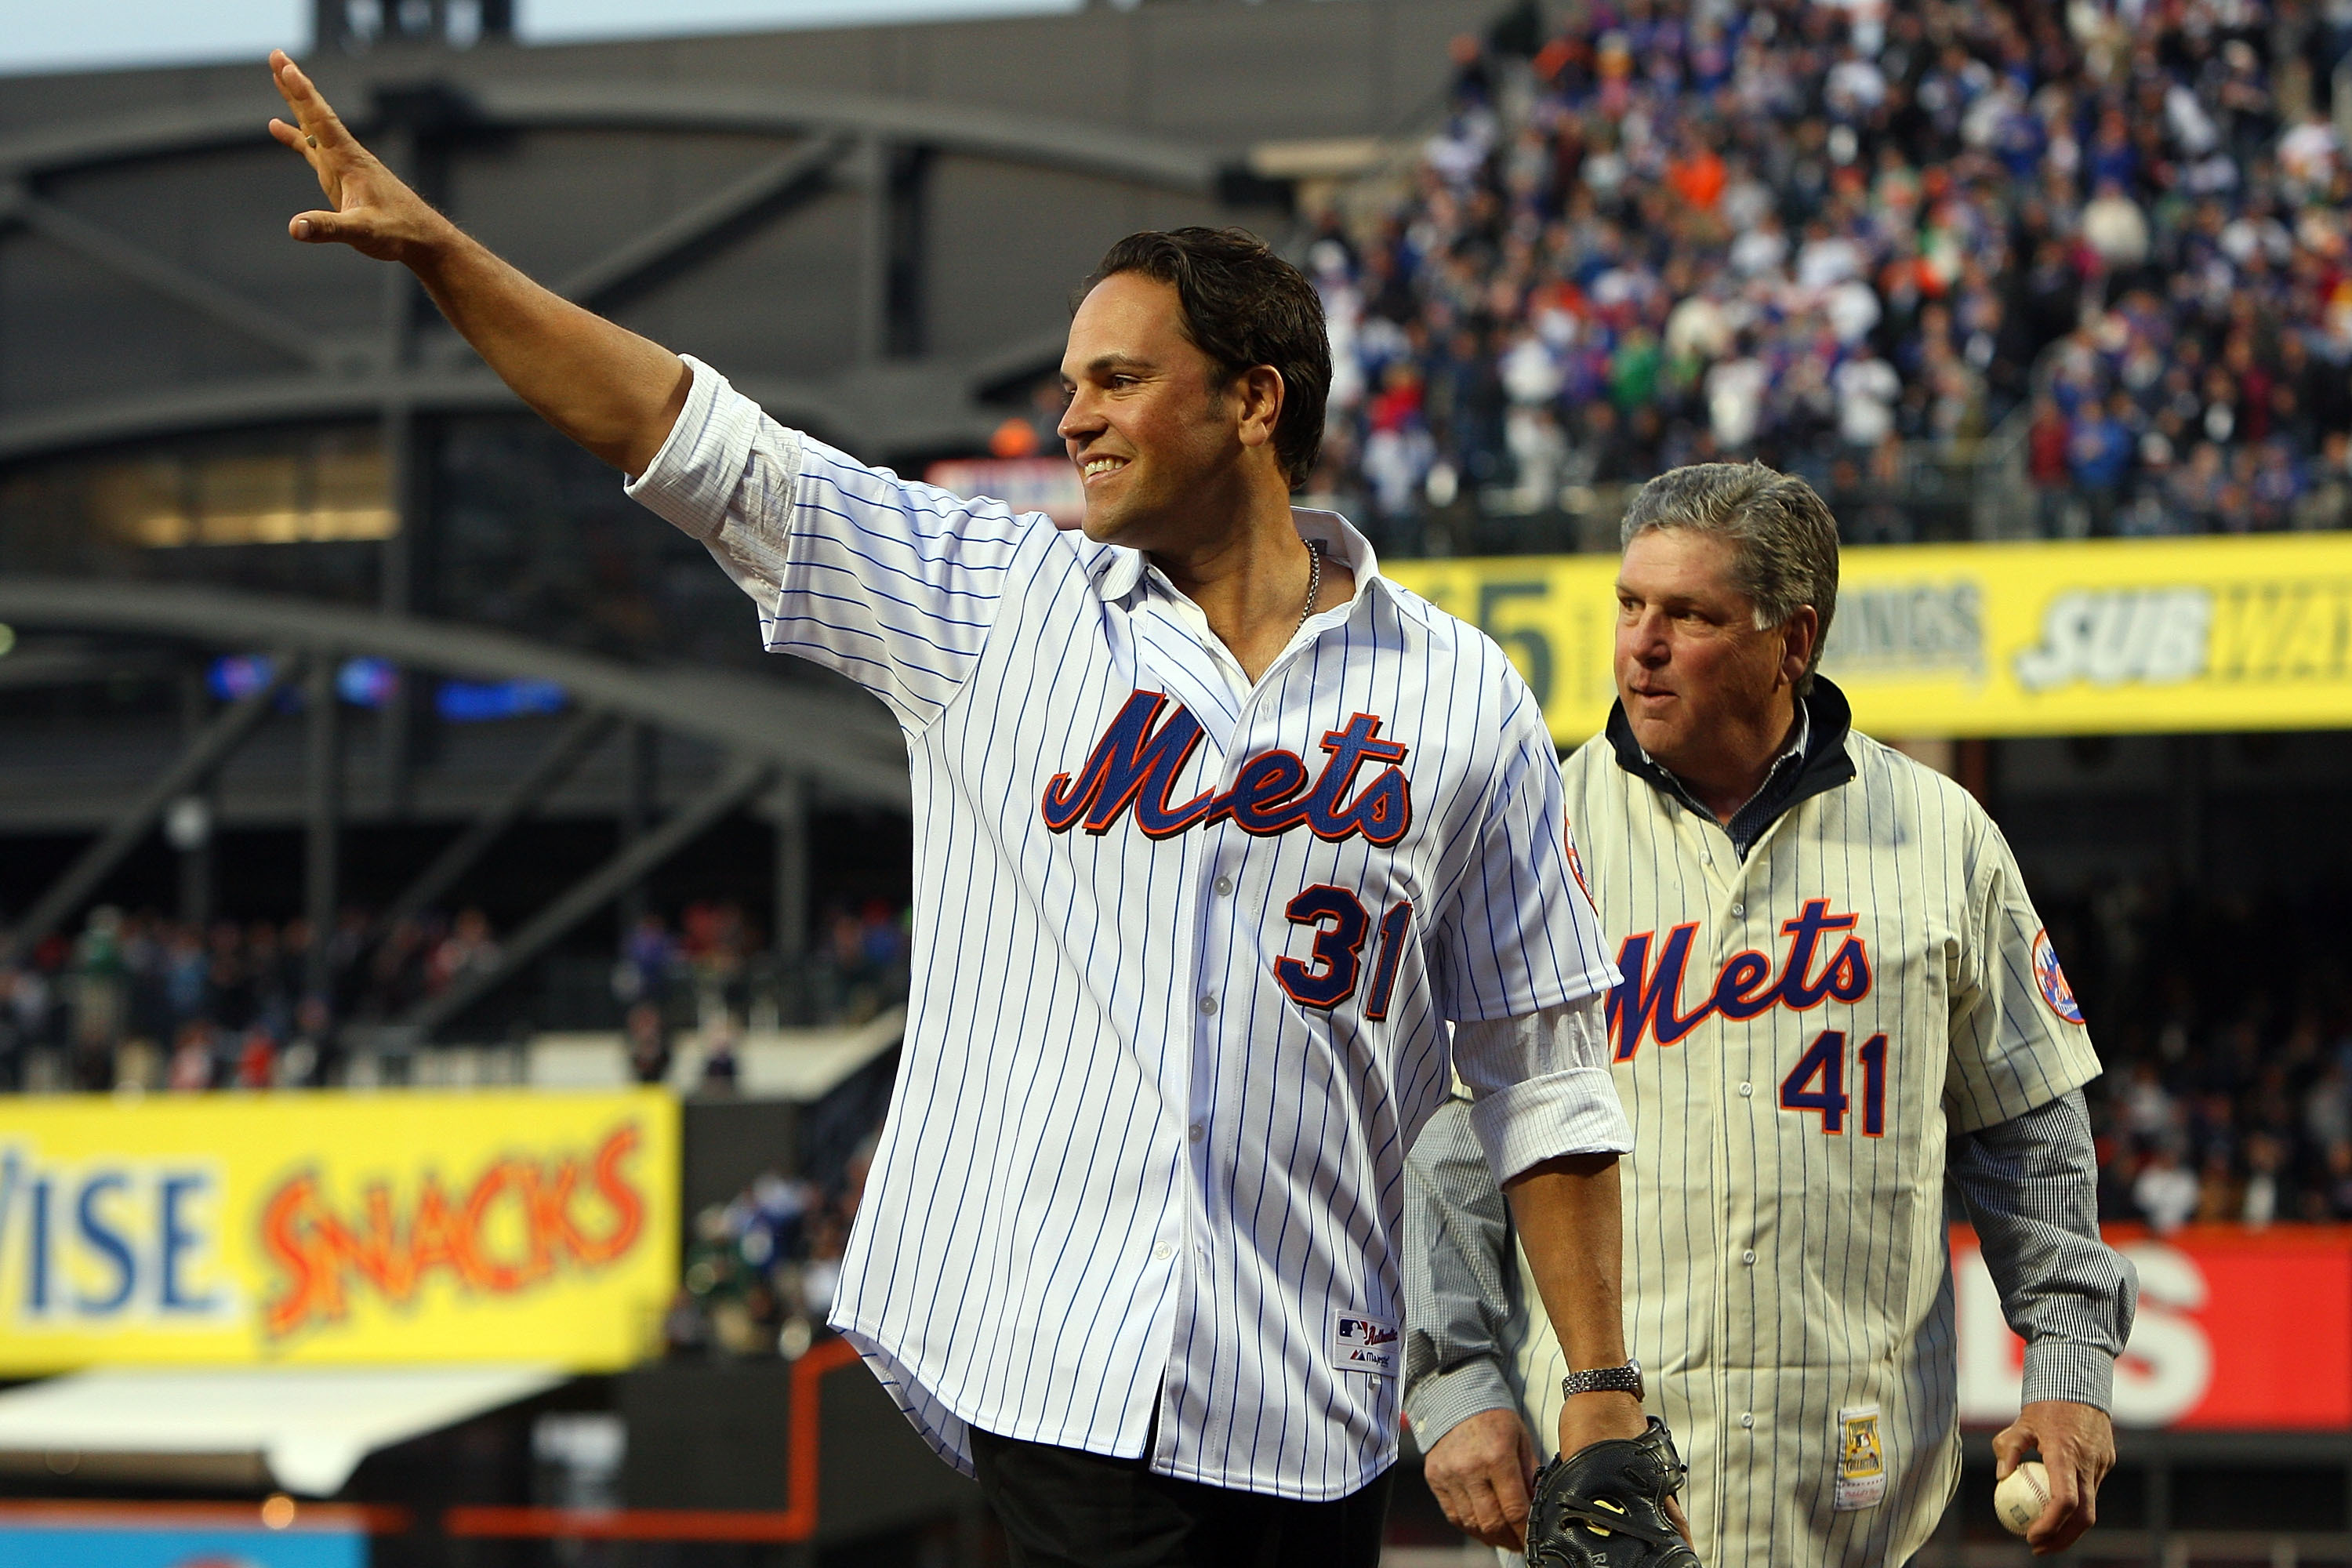 What the Mike Piazza Trade Meant to the New York Mets Organization